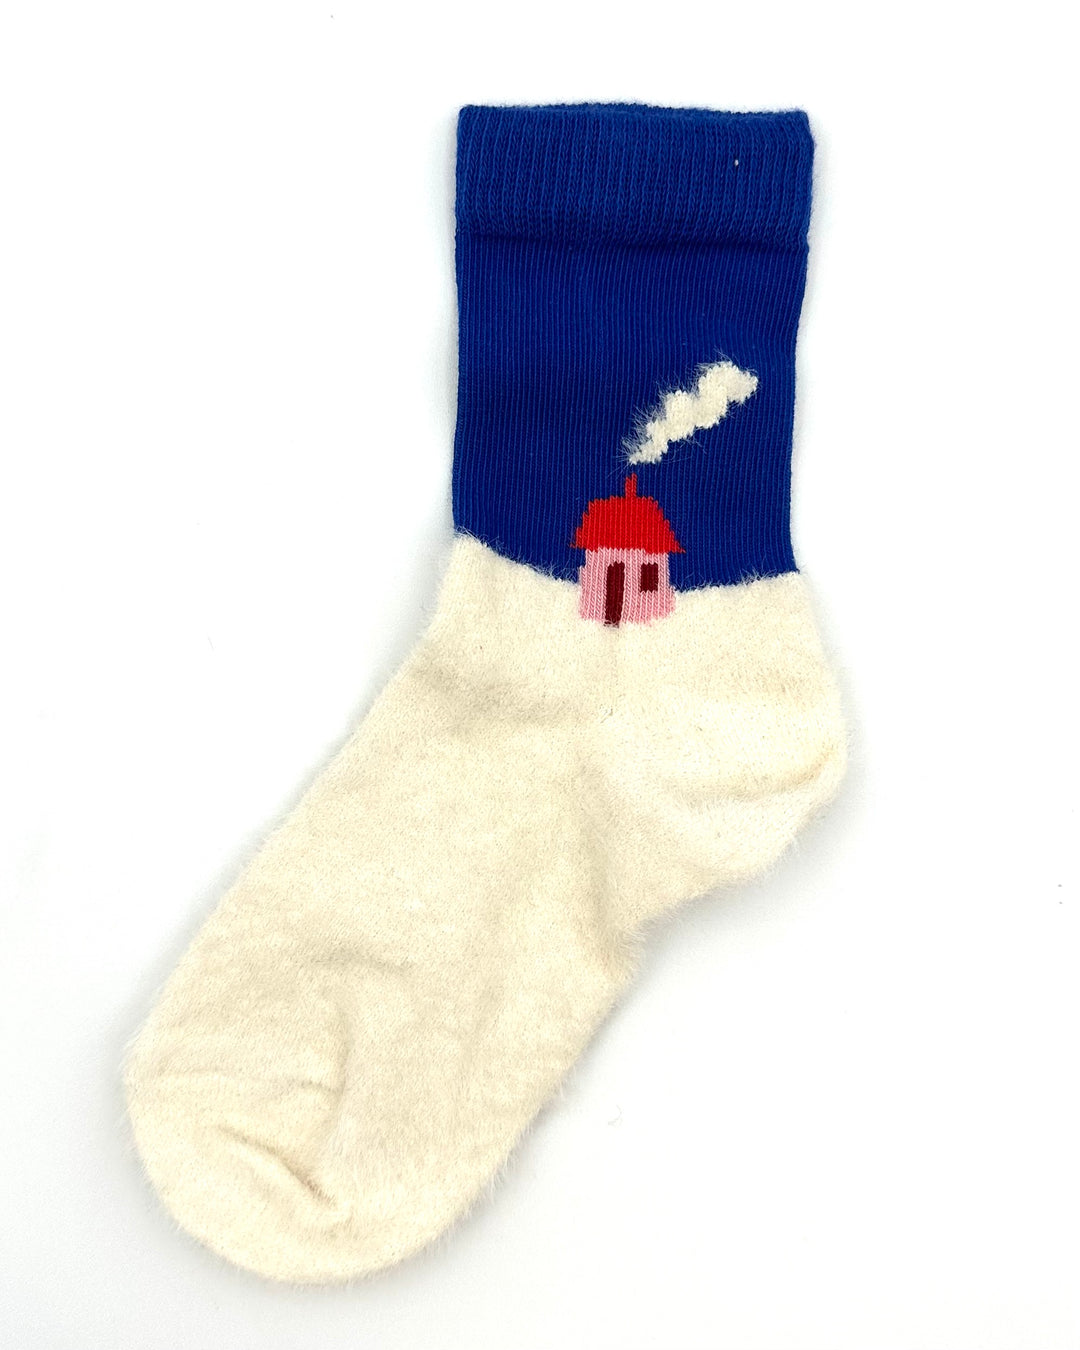 House Print Socks - Adult Unisex One Size Fits Most And Kids Size 2-3 Years